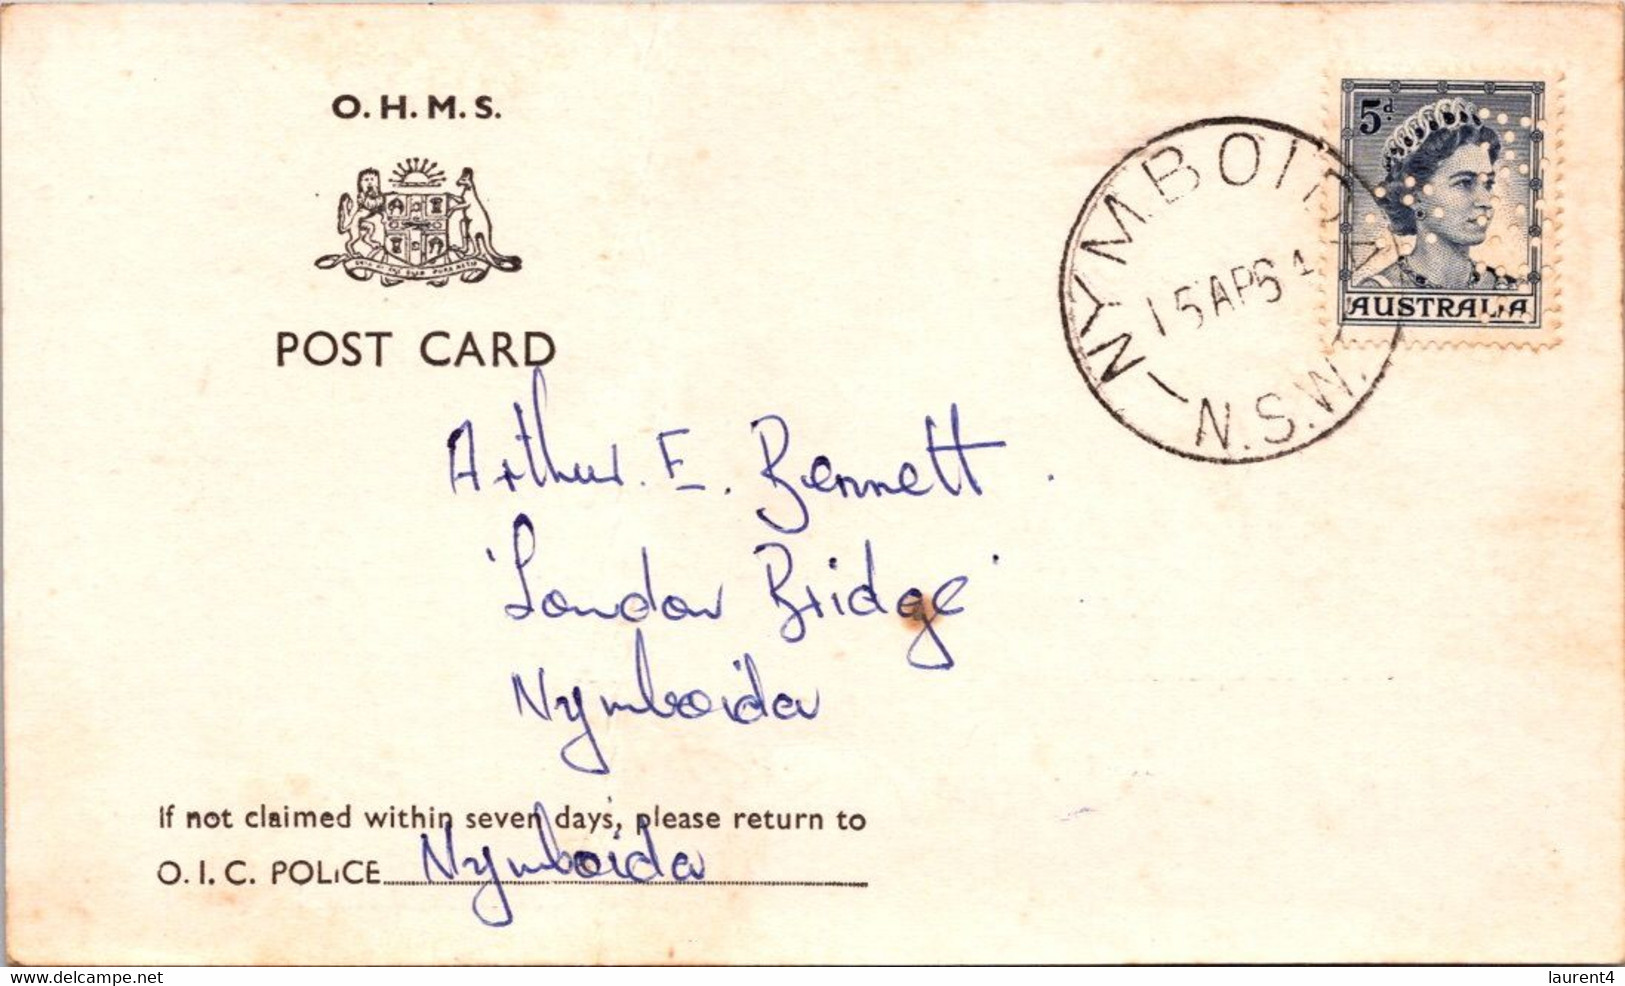 (3 A 18) Australia In 1951 ? - Posted O.H.M.S - O.I.C Police - Postcard With Perfins Stamp - Perfins